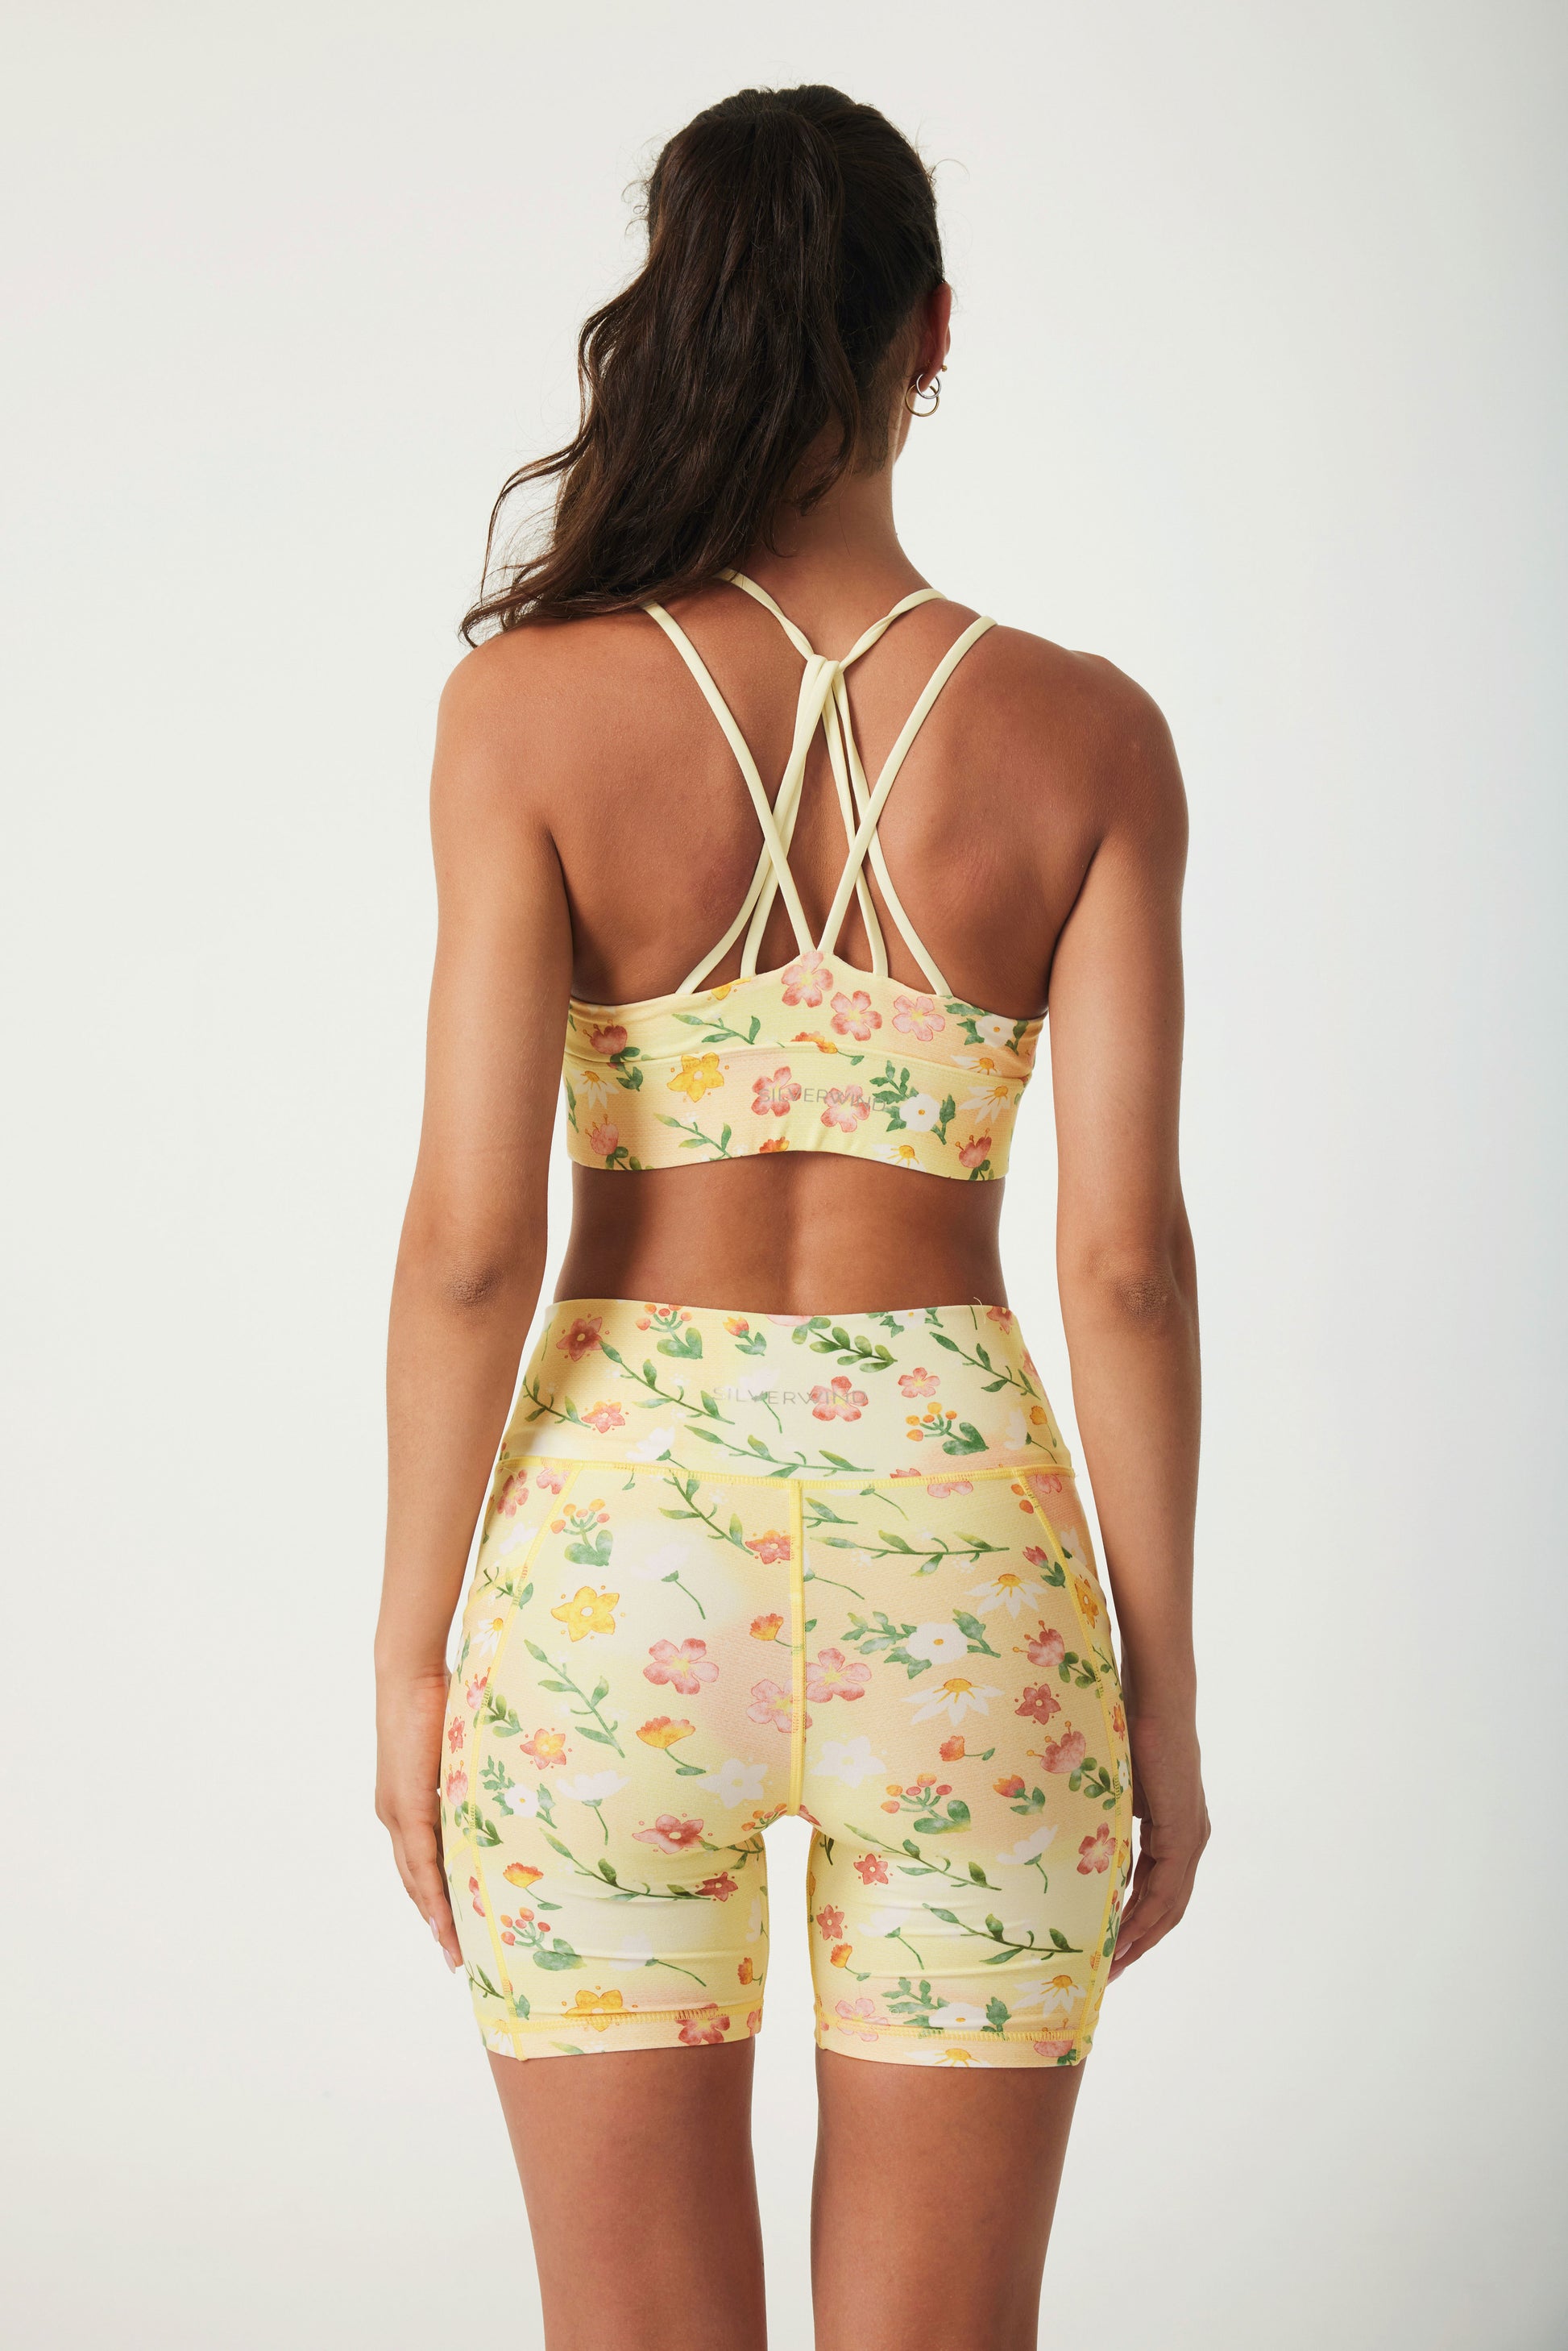 Blossom Bright Yellow High-waisted Shorts - SILVERWIND